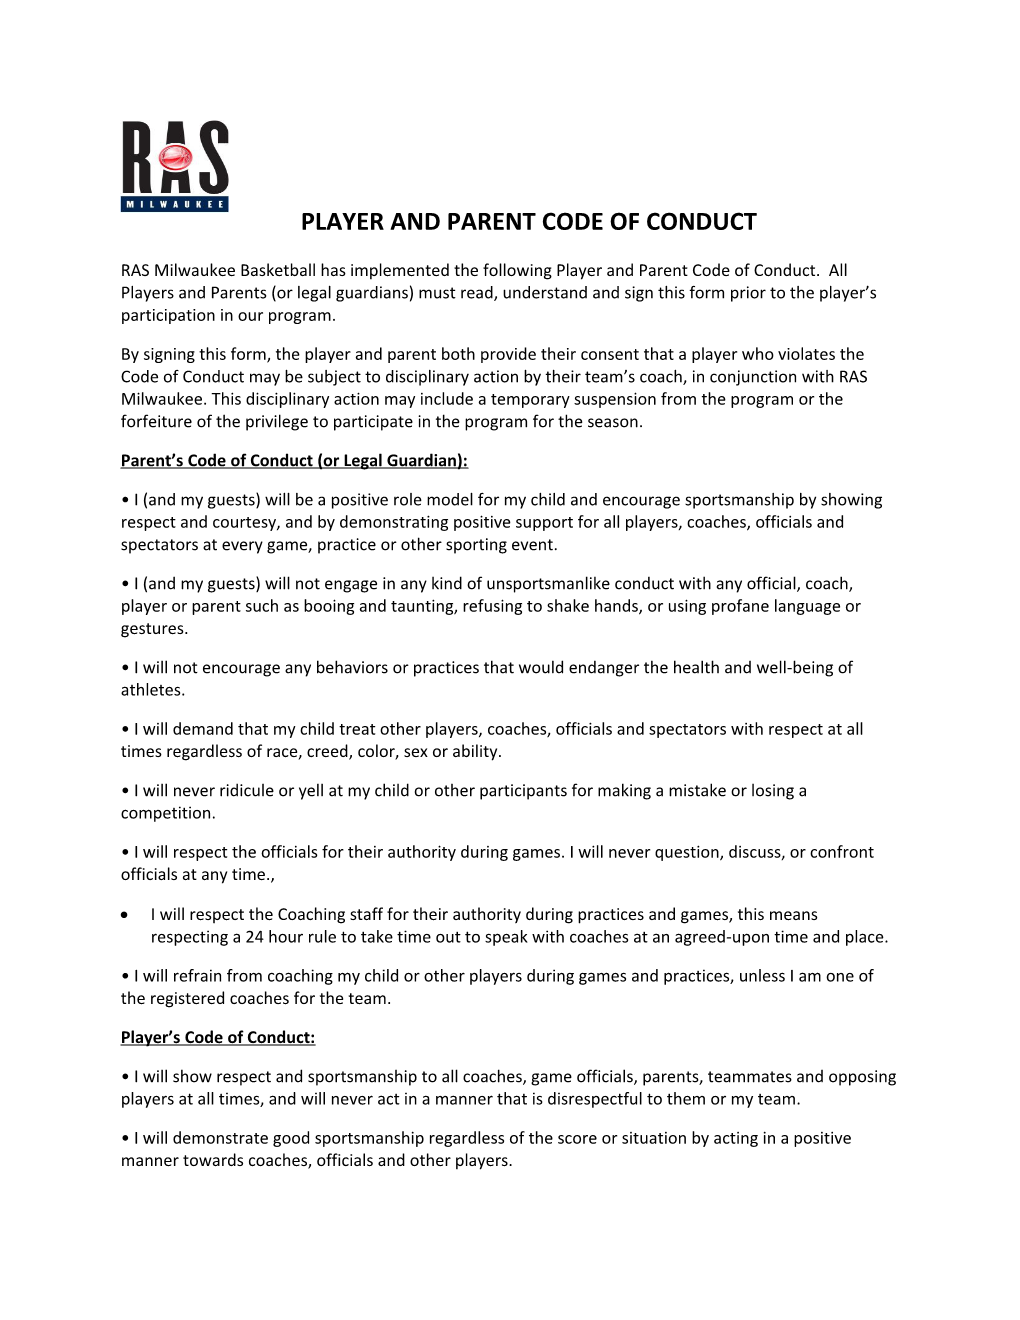 Parent S Code of Conduct (Or Legal Guardian)